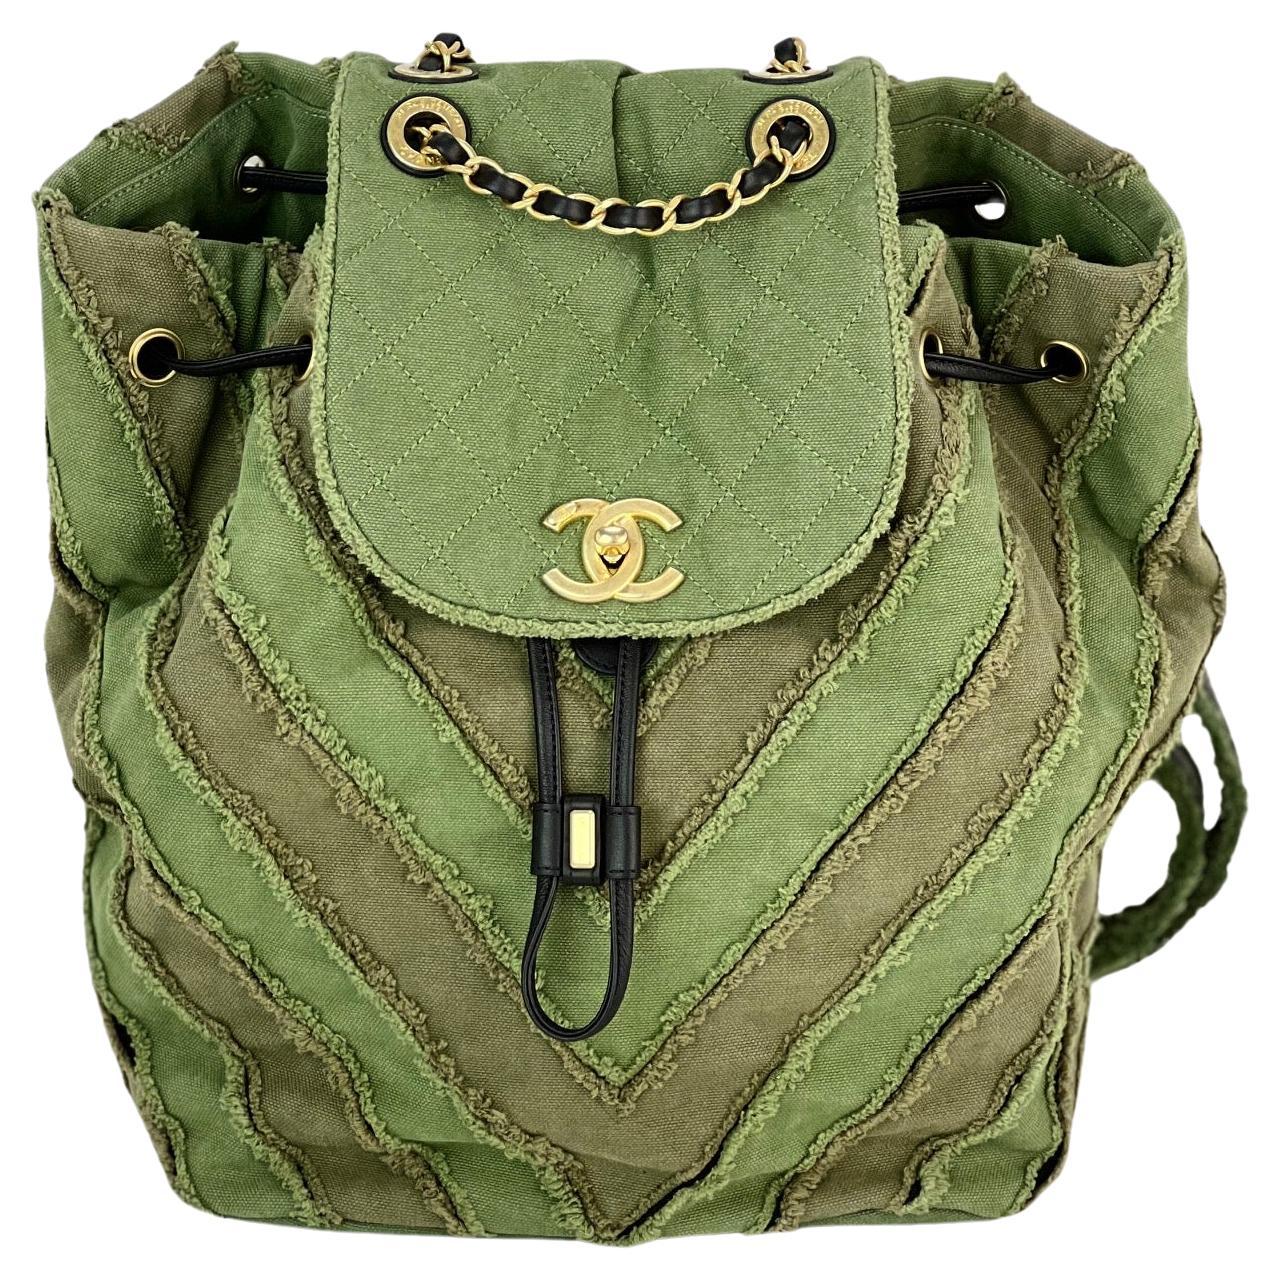 CHANEL Backpack Canvas Chevron Cuba Patchwork Khaki Green Backpack For Sale